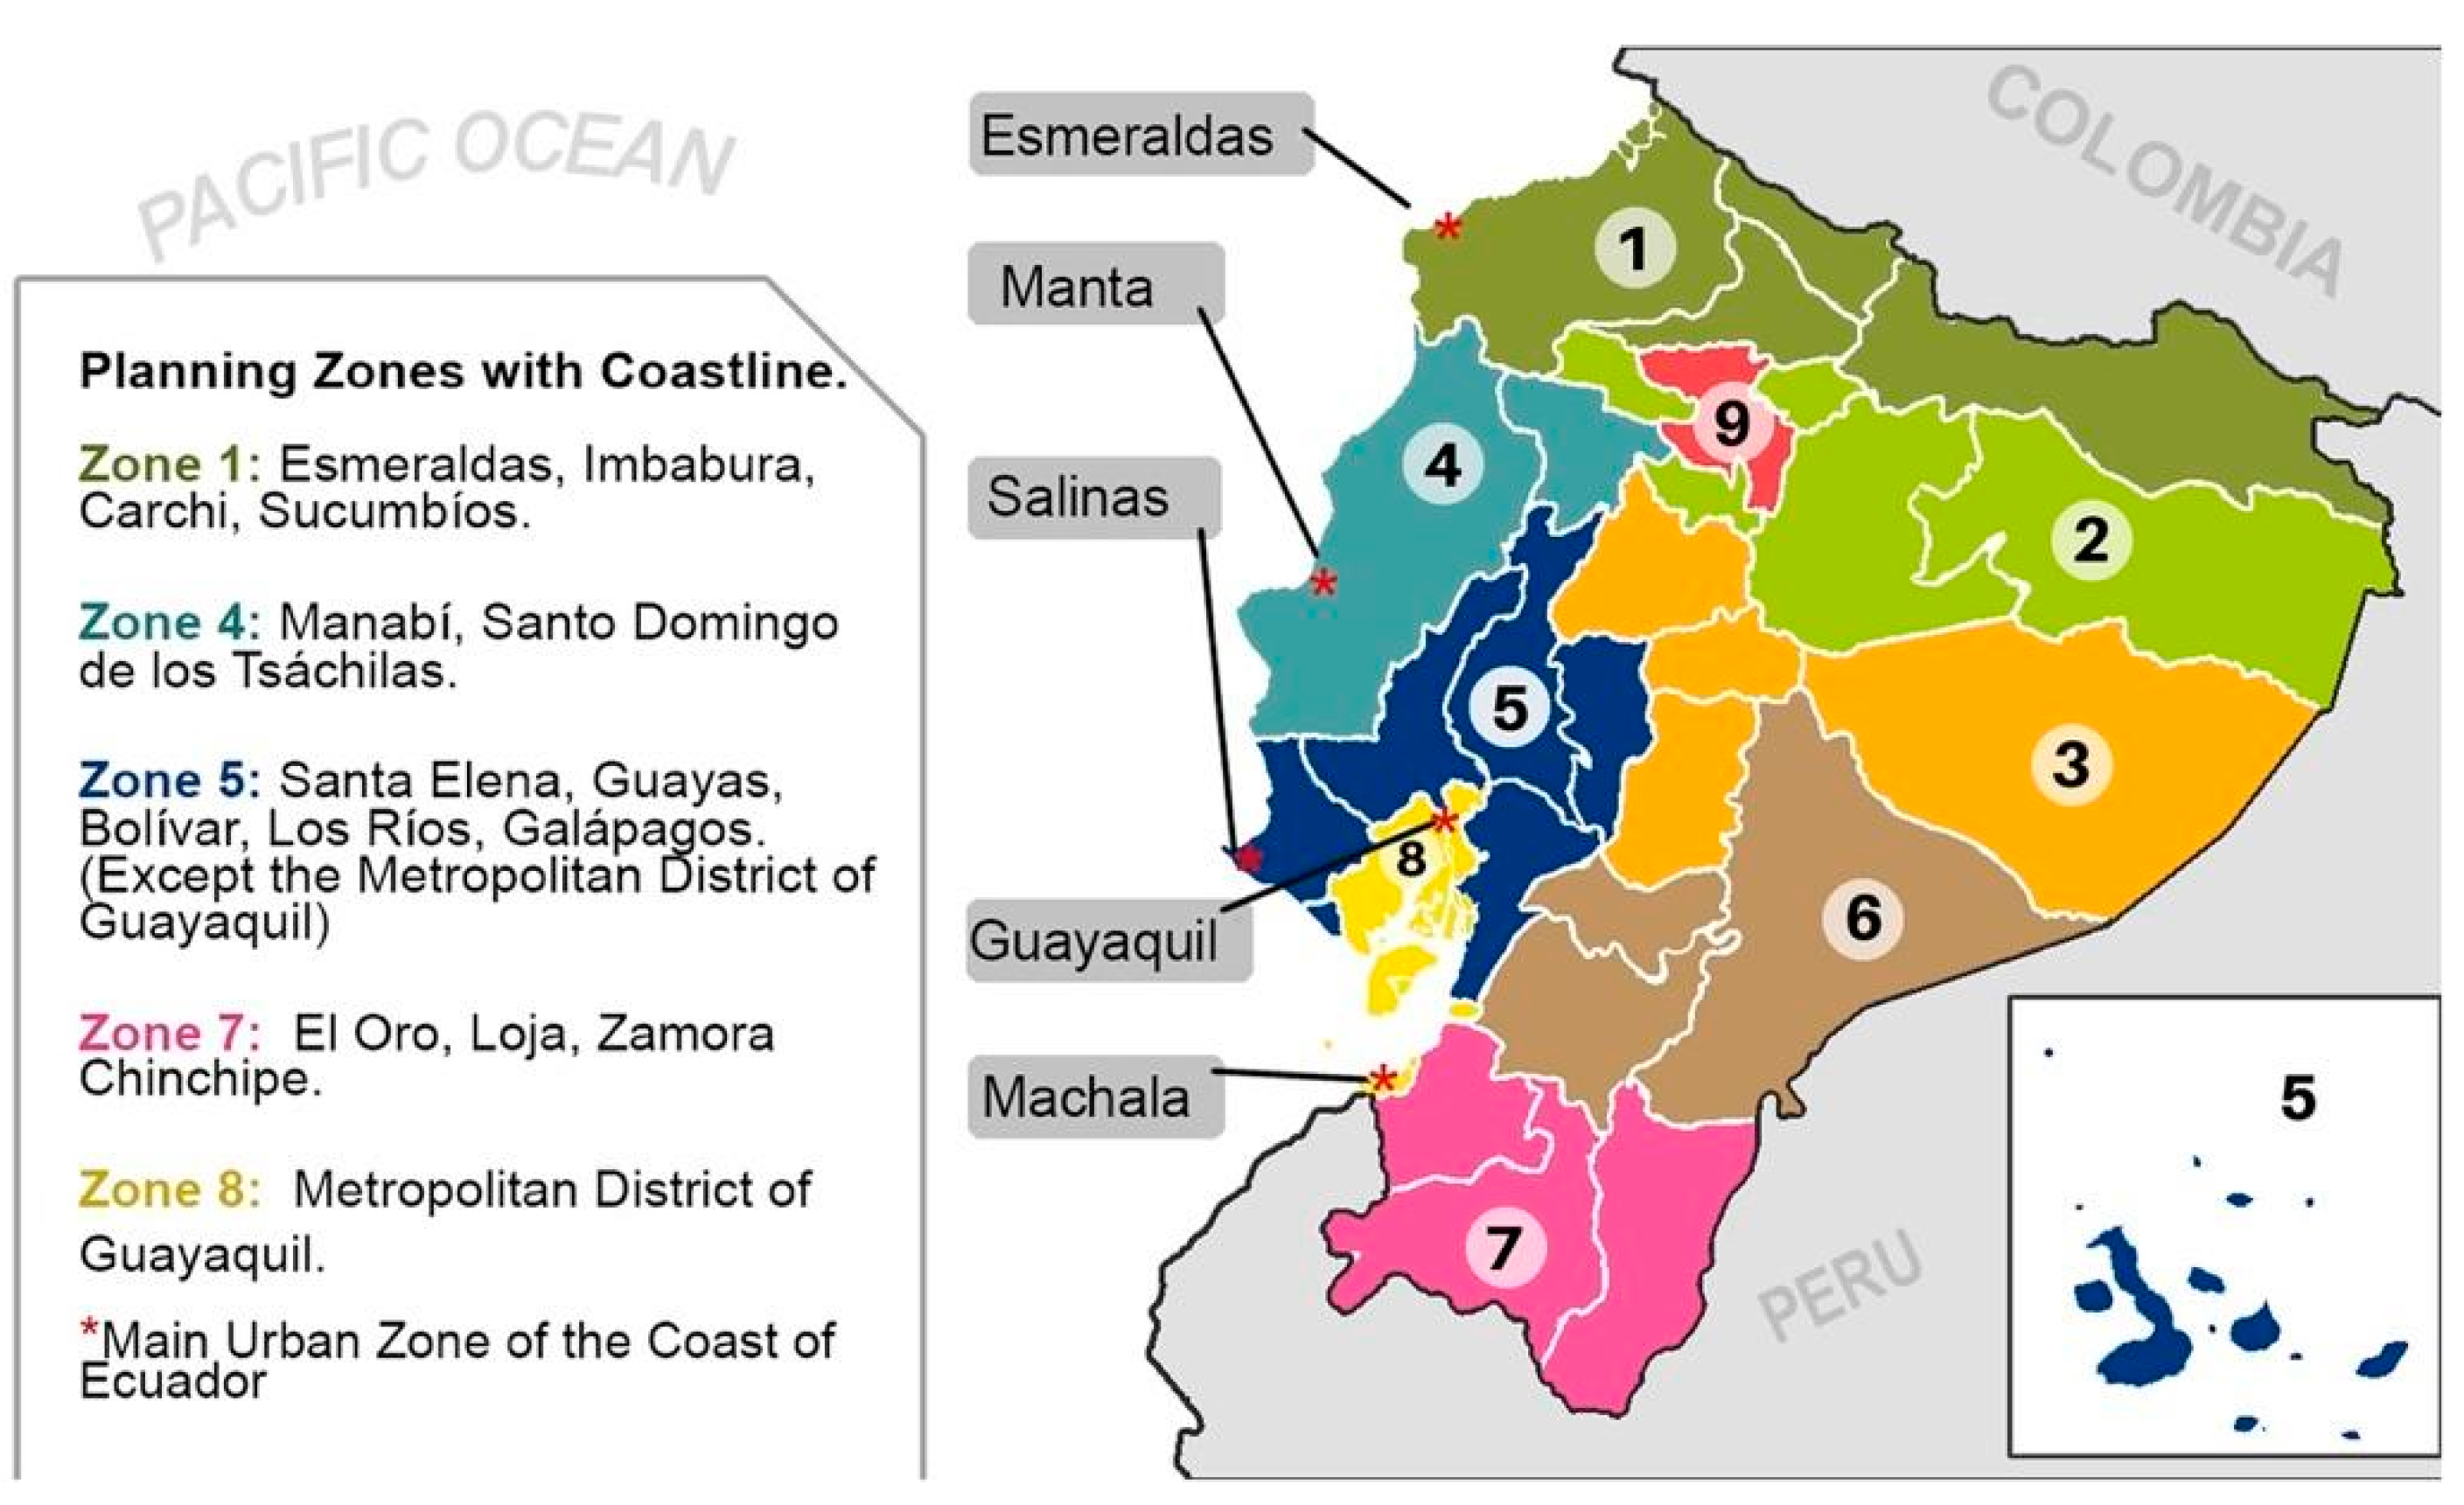 The marine zoning of the State Plan for Coastal Zone Management in